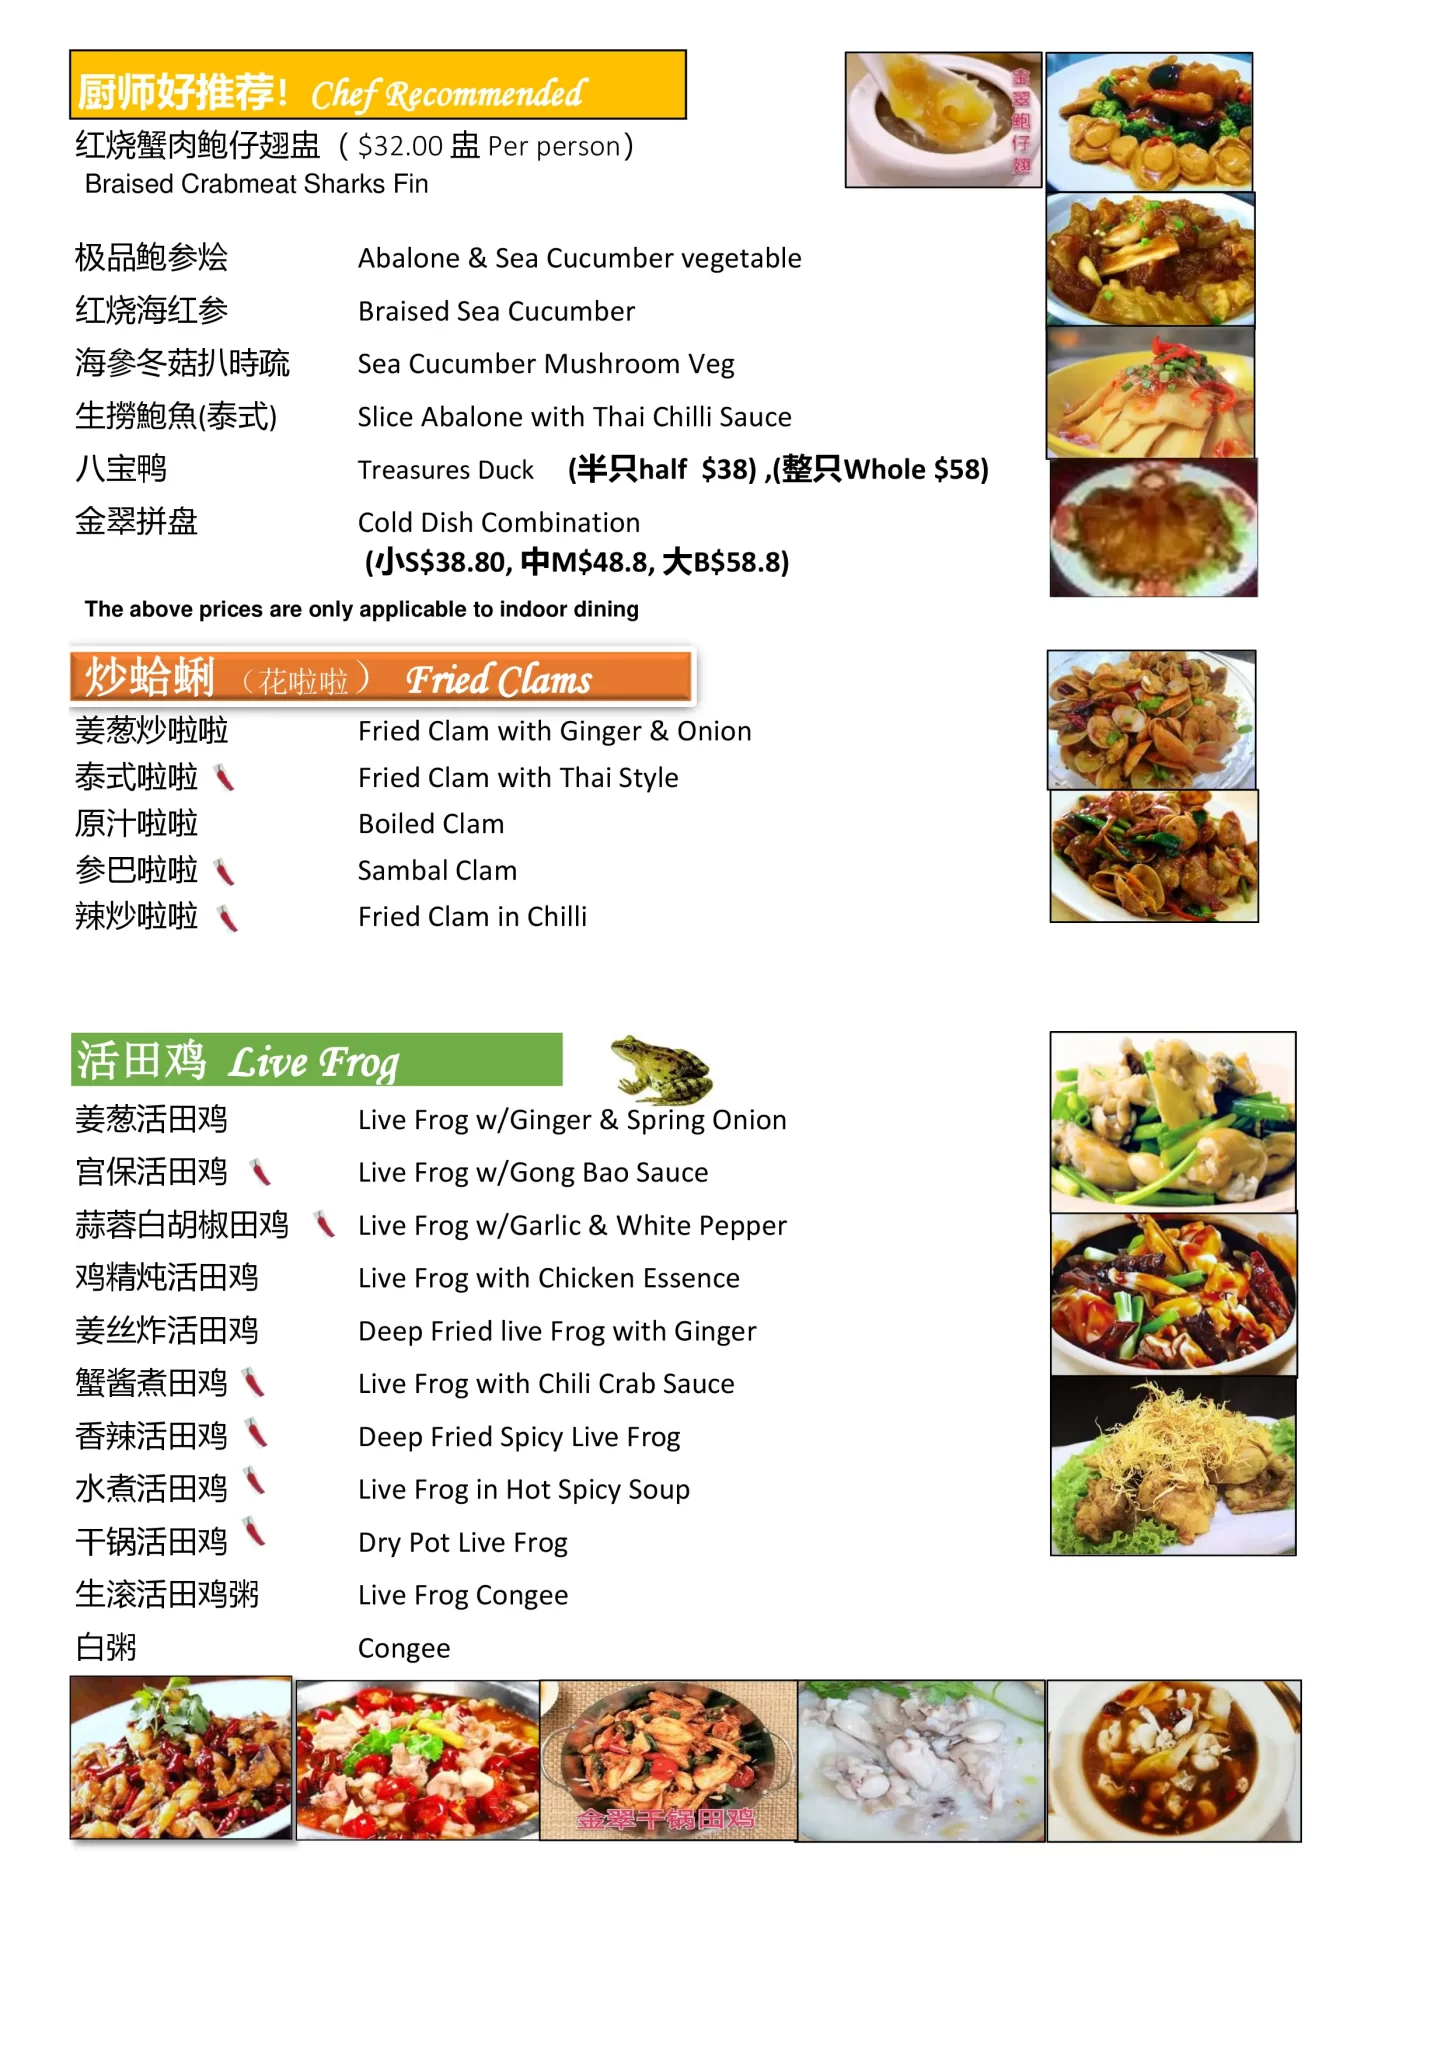 GOLDEN JADE RESTAURANT CHEF'S RECOMMENDATIONS AND FRIED CLAMS MENU 2024